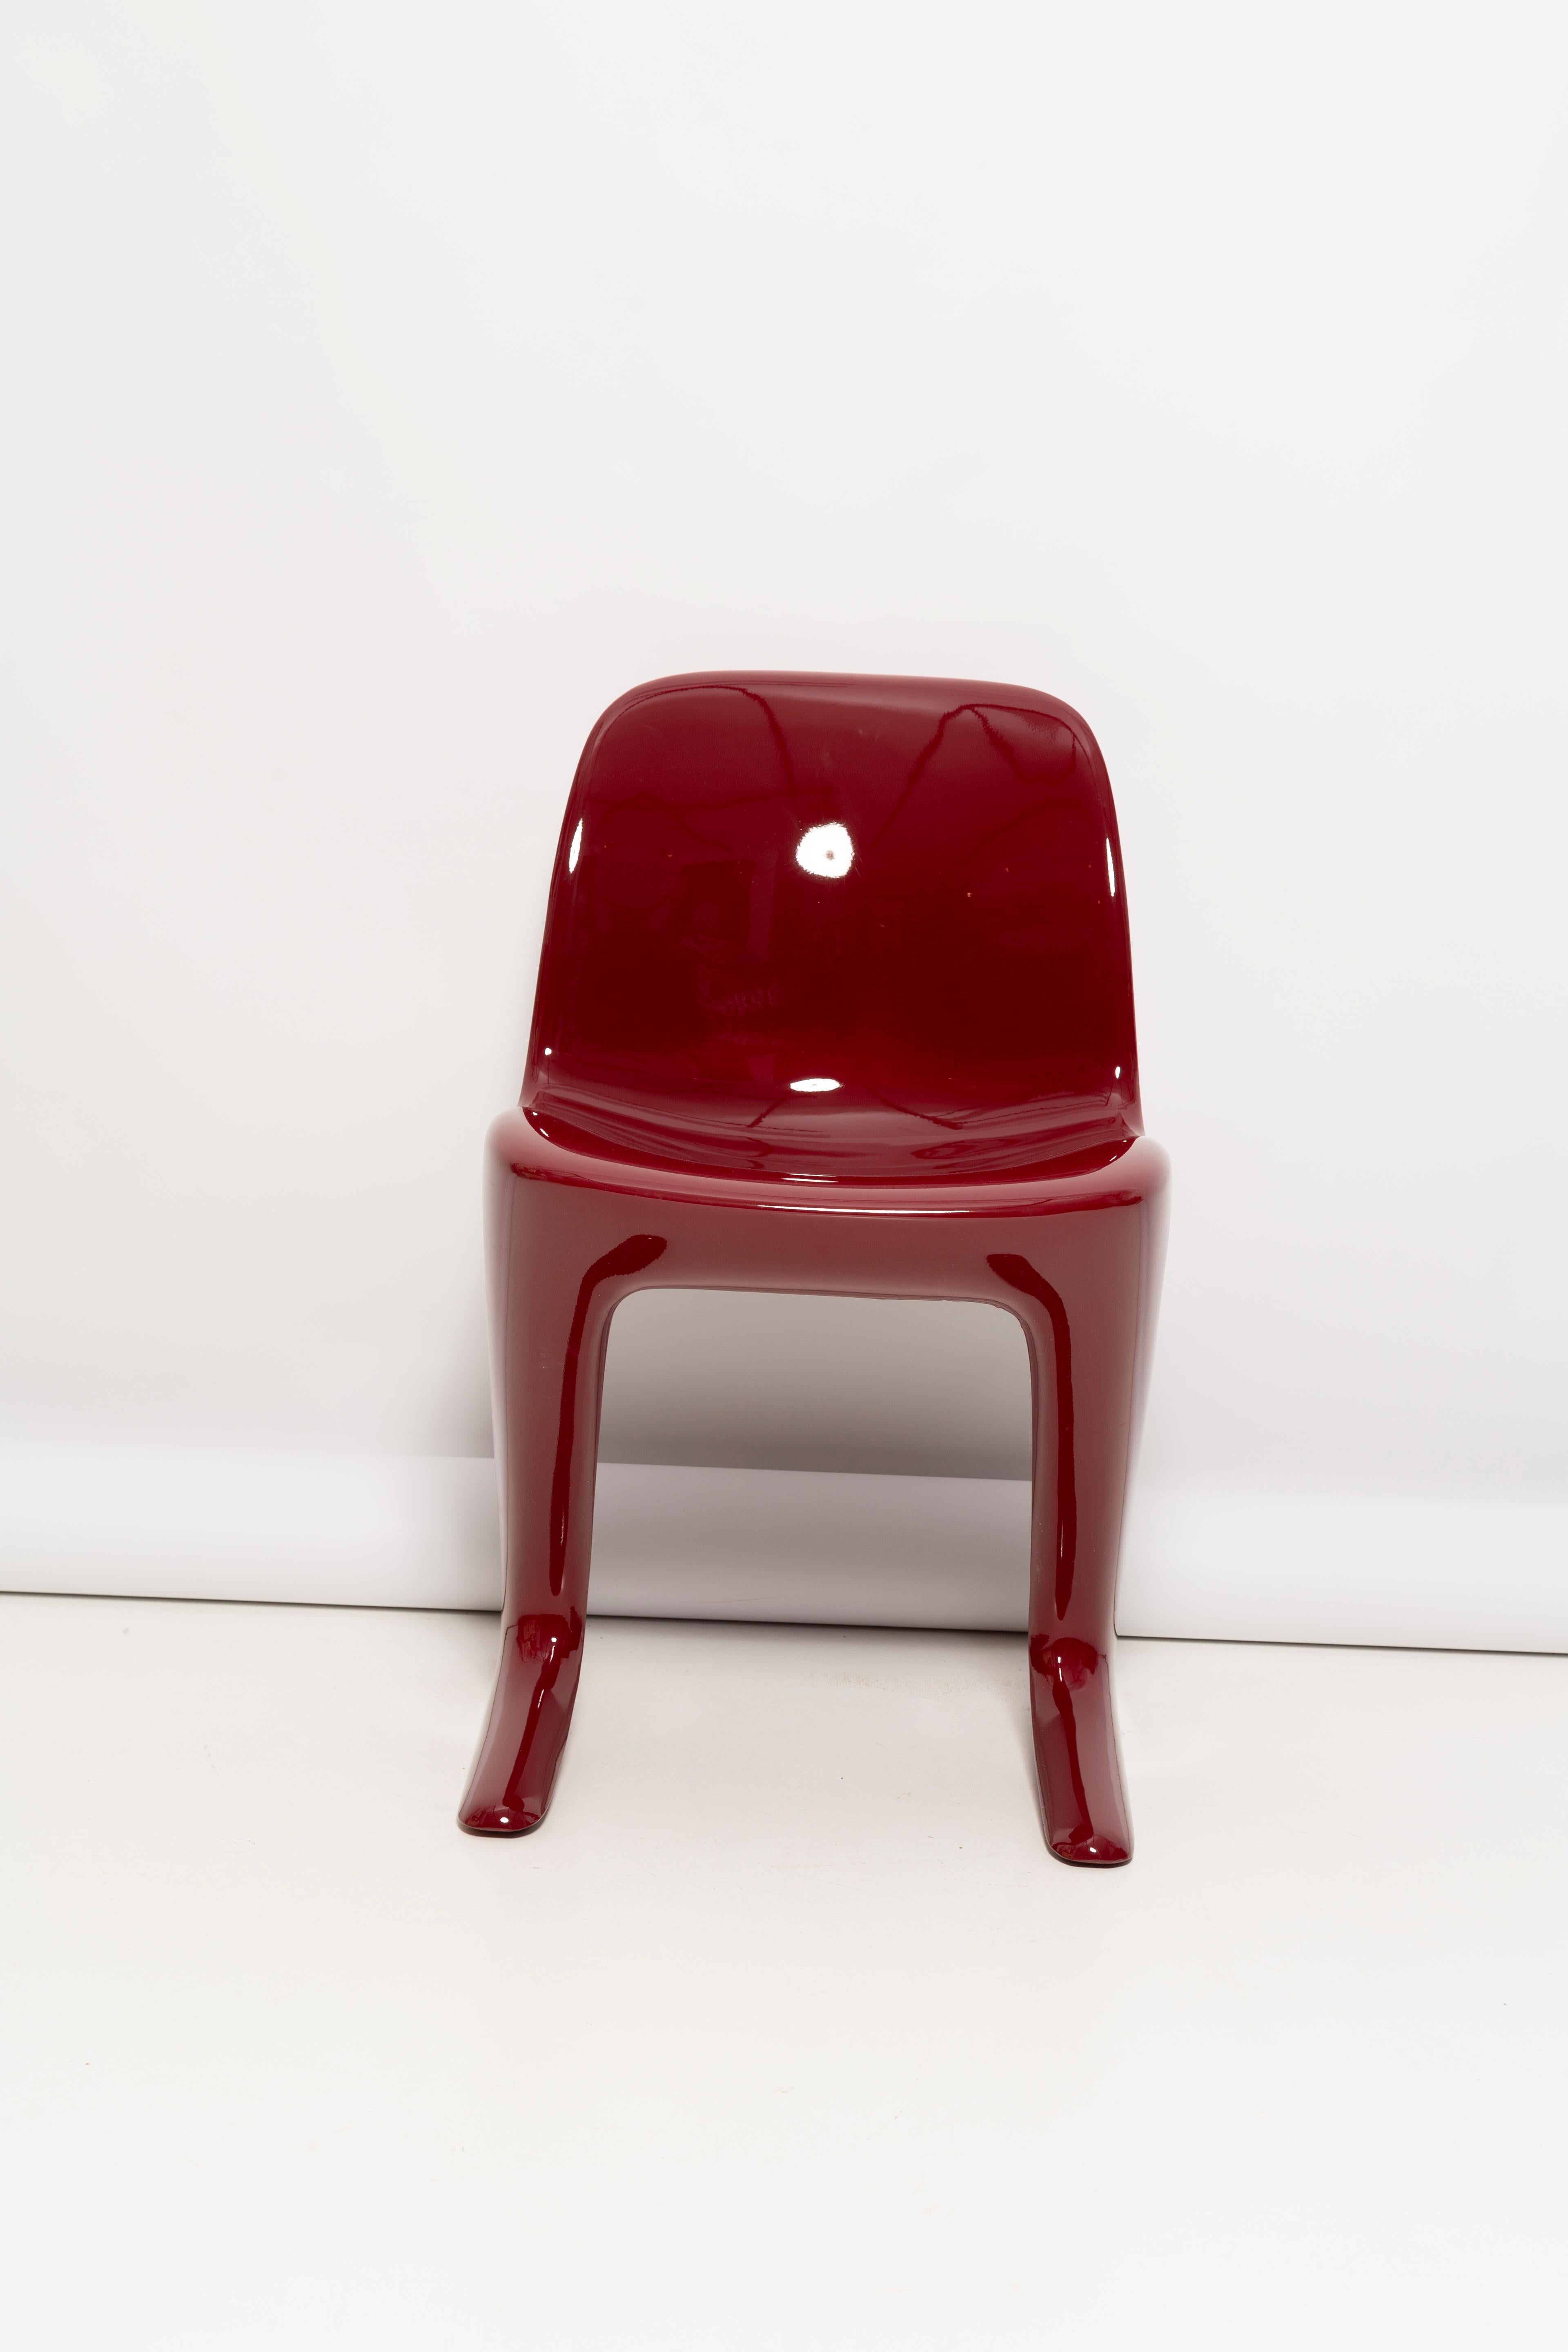 Fiberglass Set of Six Dark Red Wine Kangaroo Chairs Designed by Ernst Moeckl, Germany, 1968 For Sale